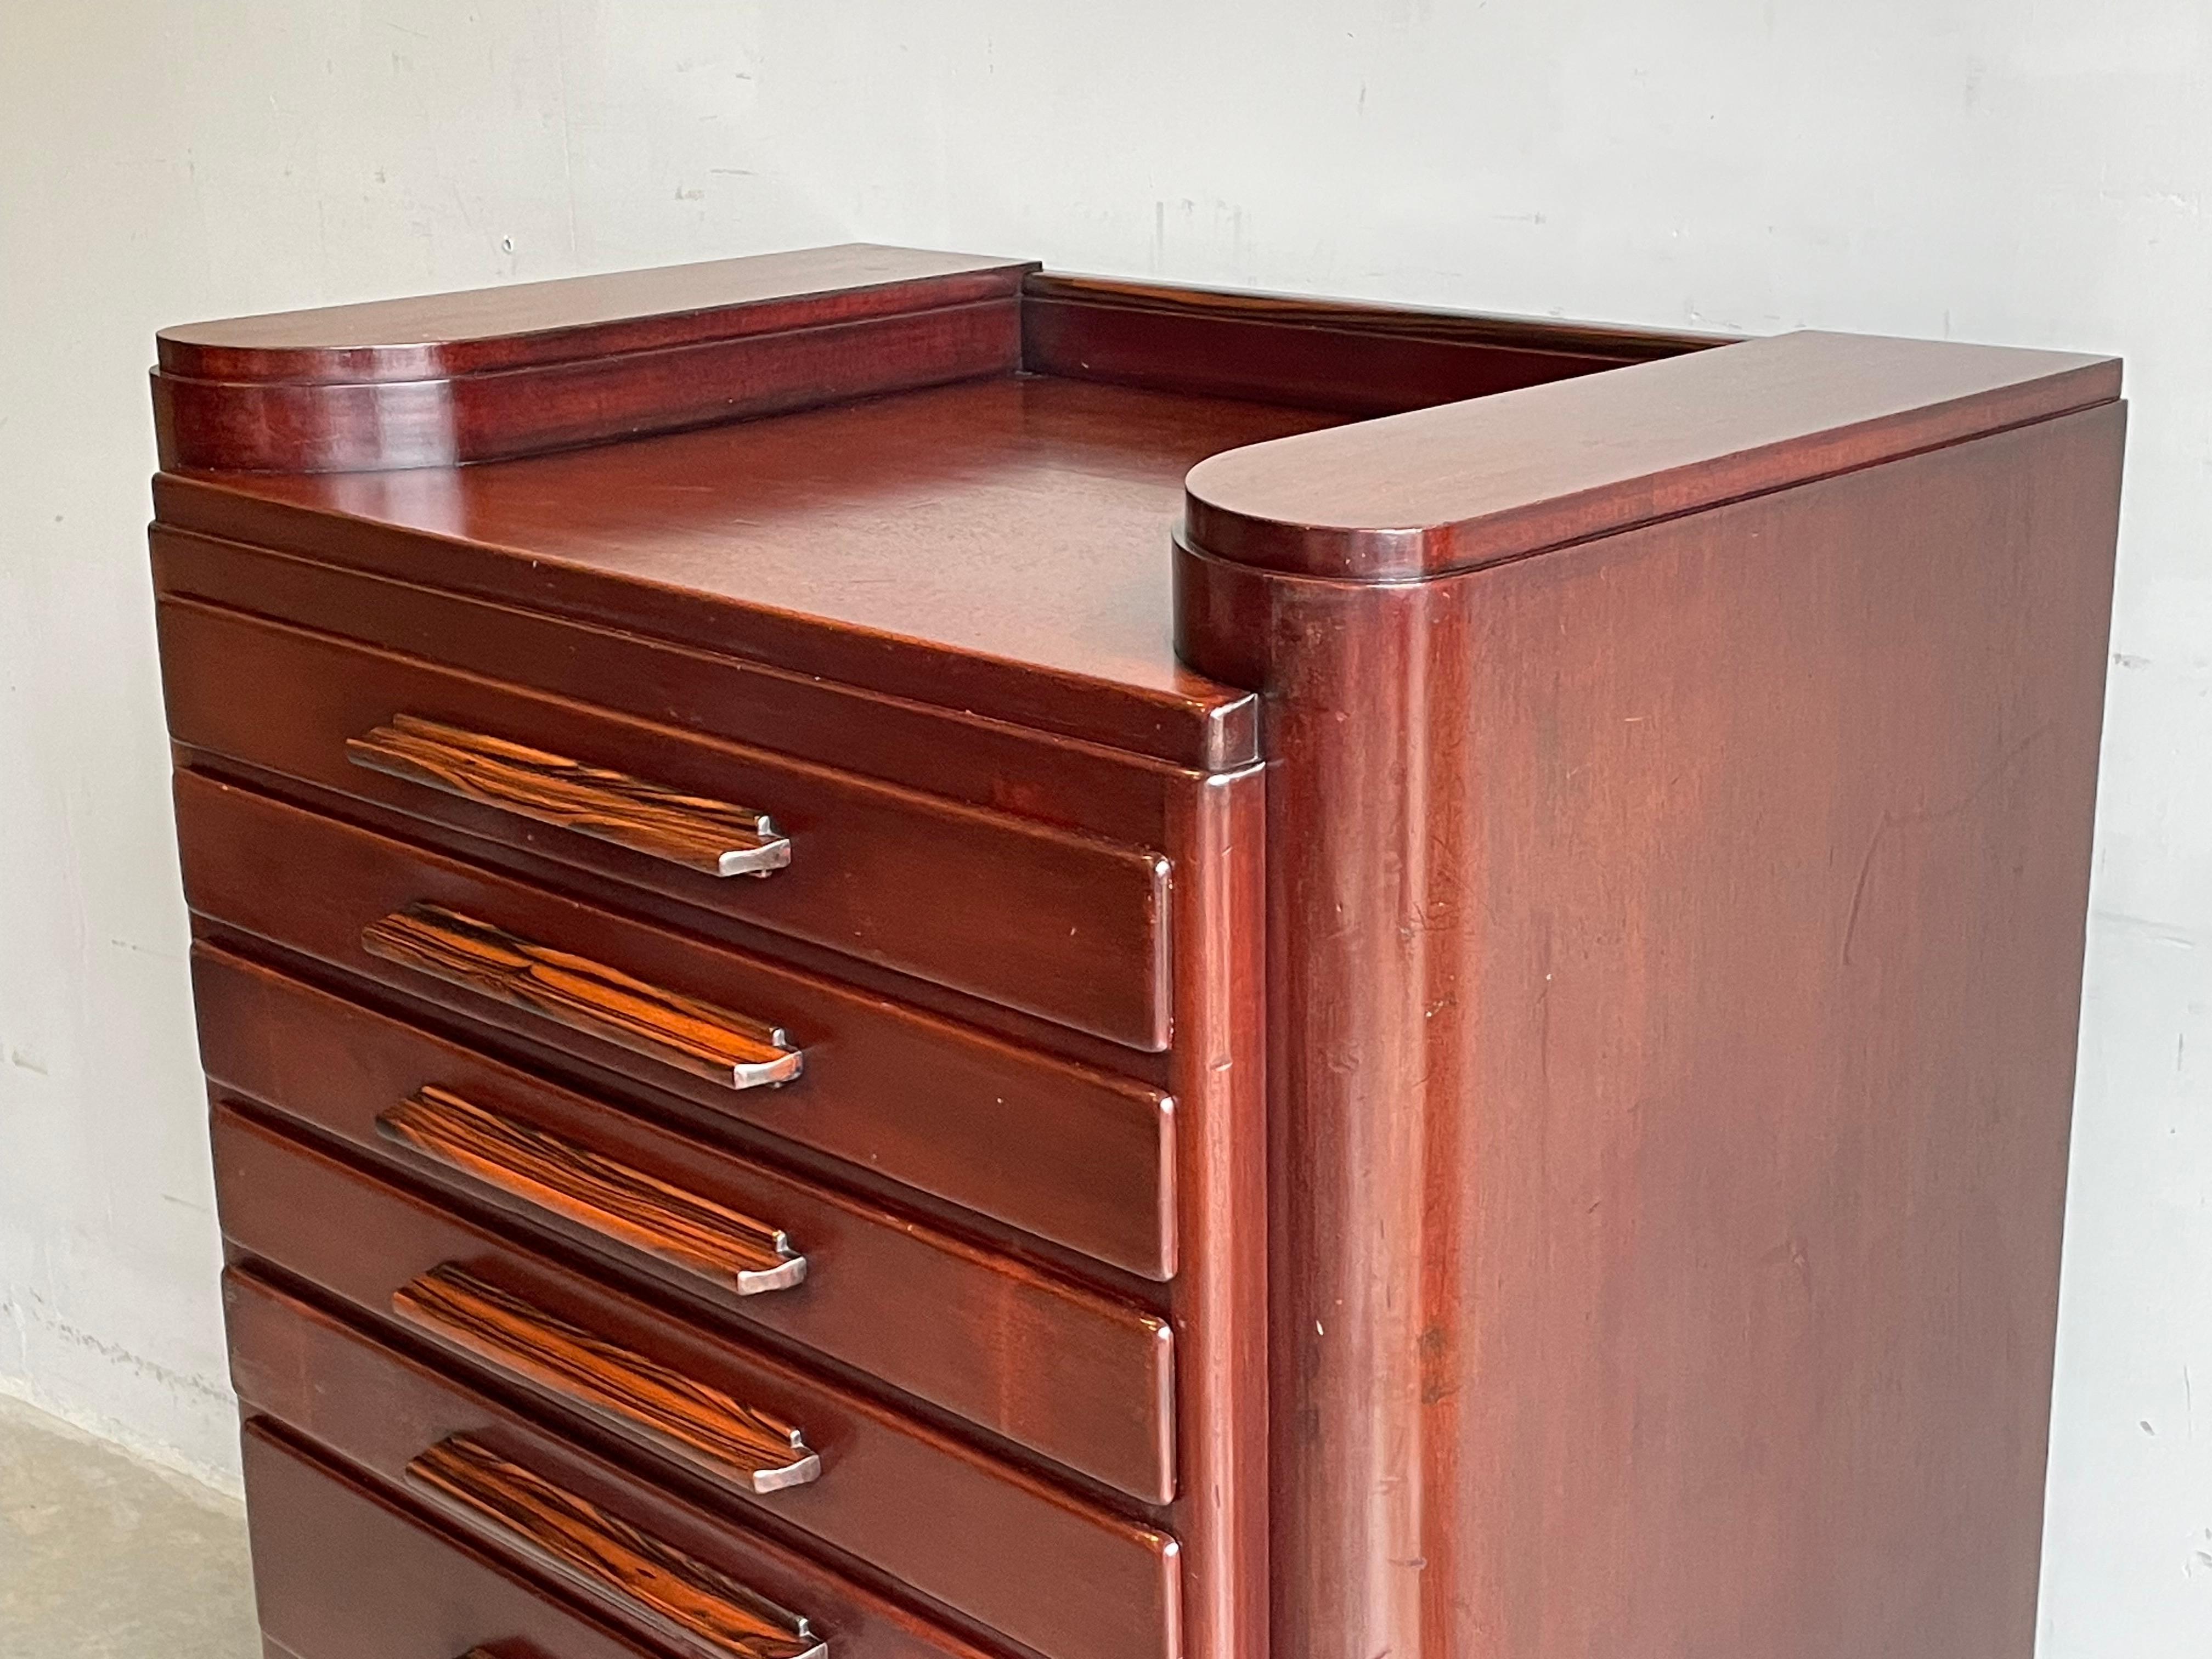 Rare Art Deco Chest of Drawers / Filing Cabinet with Stunning Coromandel Handles For Sale 7